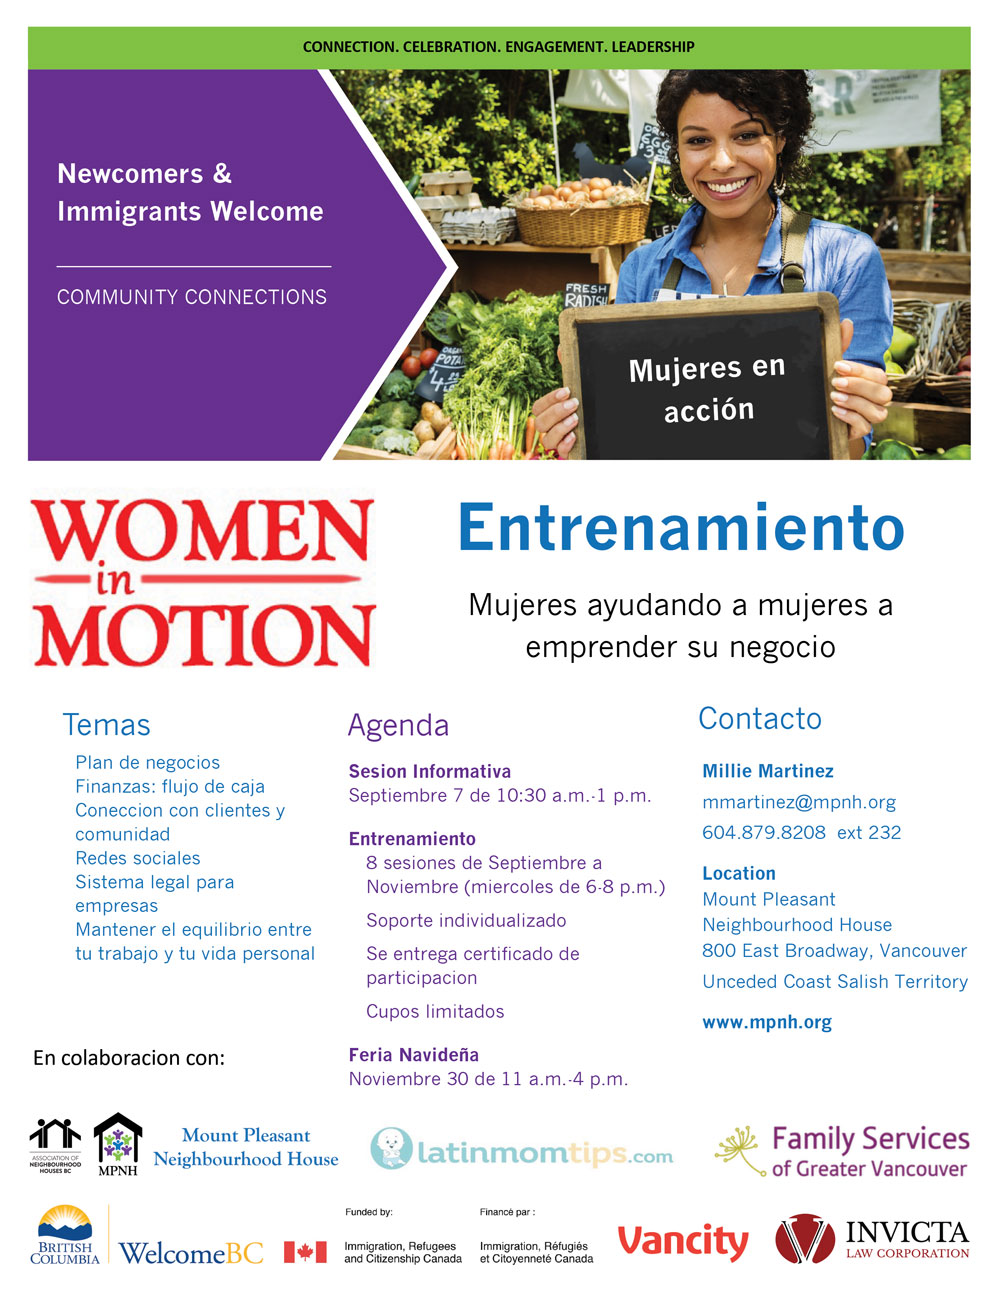 An image of the poster with program details, featuring a woman working at a market stand, holding a chalkboard that says "Mujeres en acción"